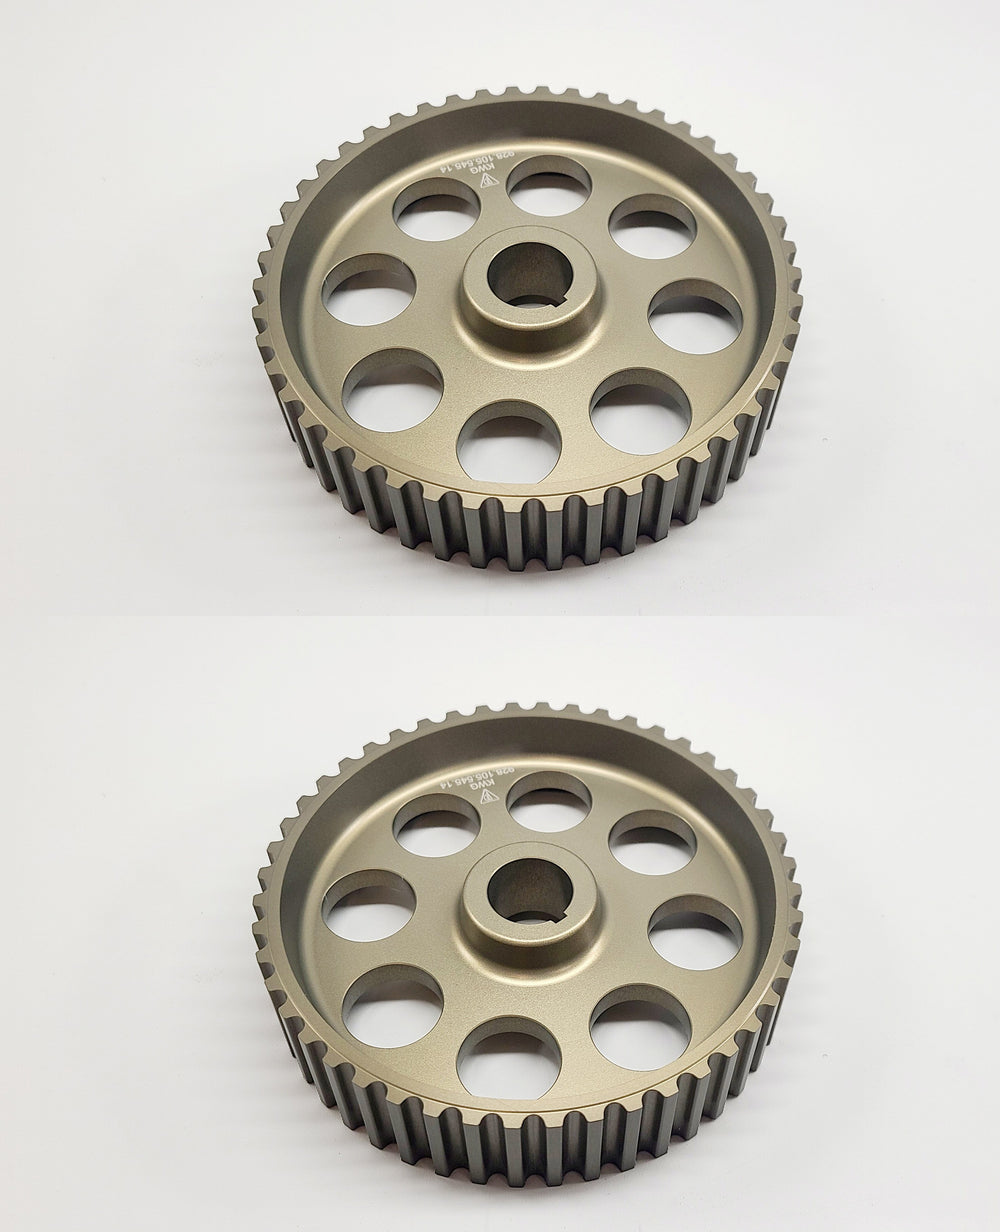 set of two - 928 105 545 14 - Cam Gear 83 to 86 16v - New